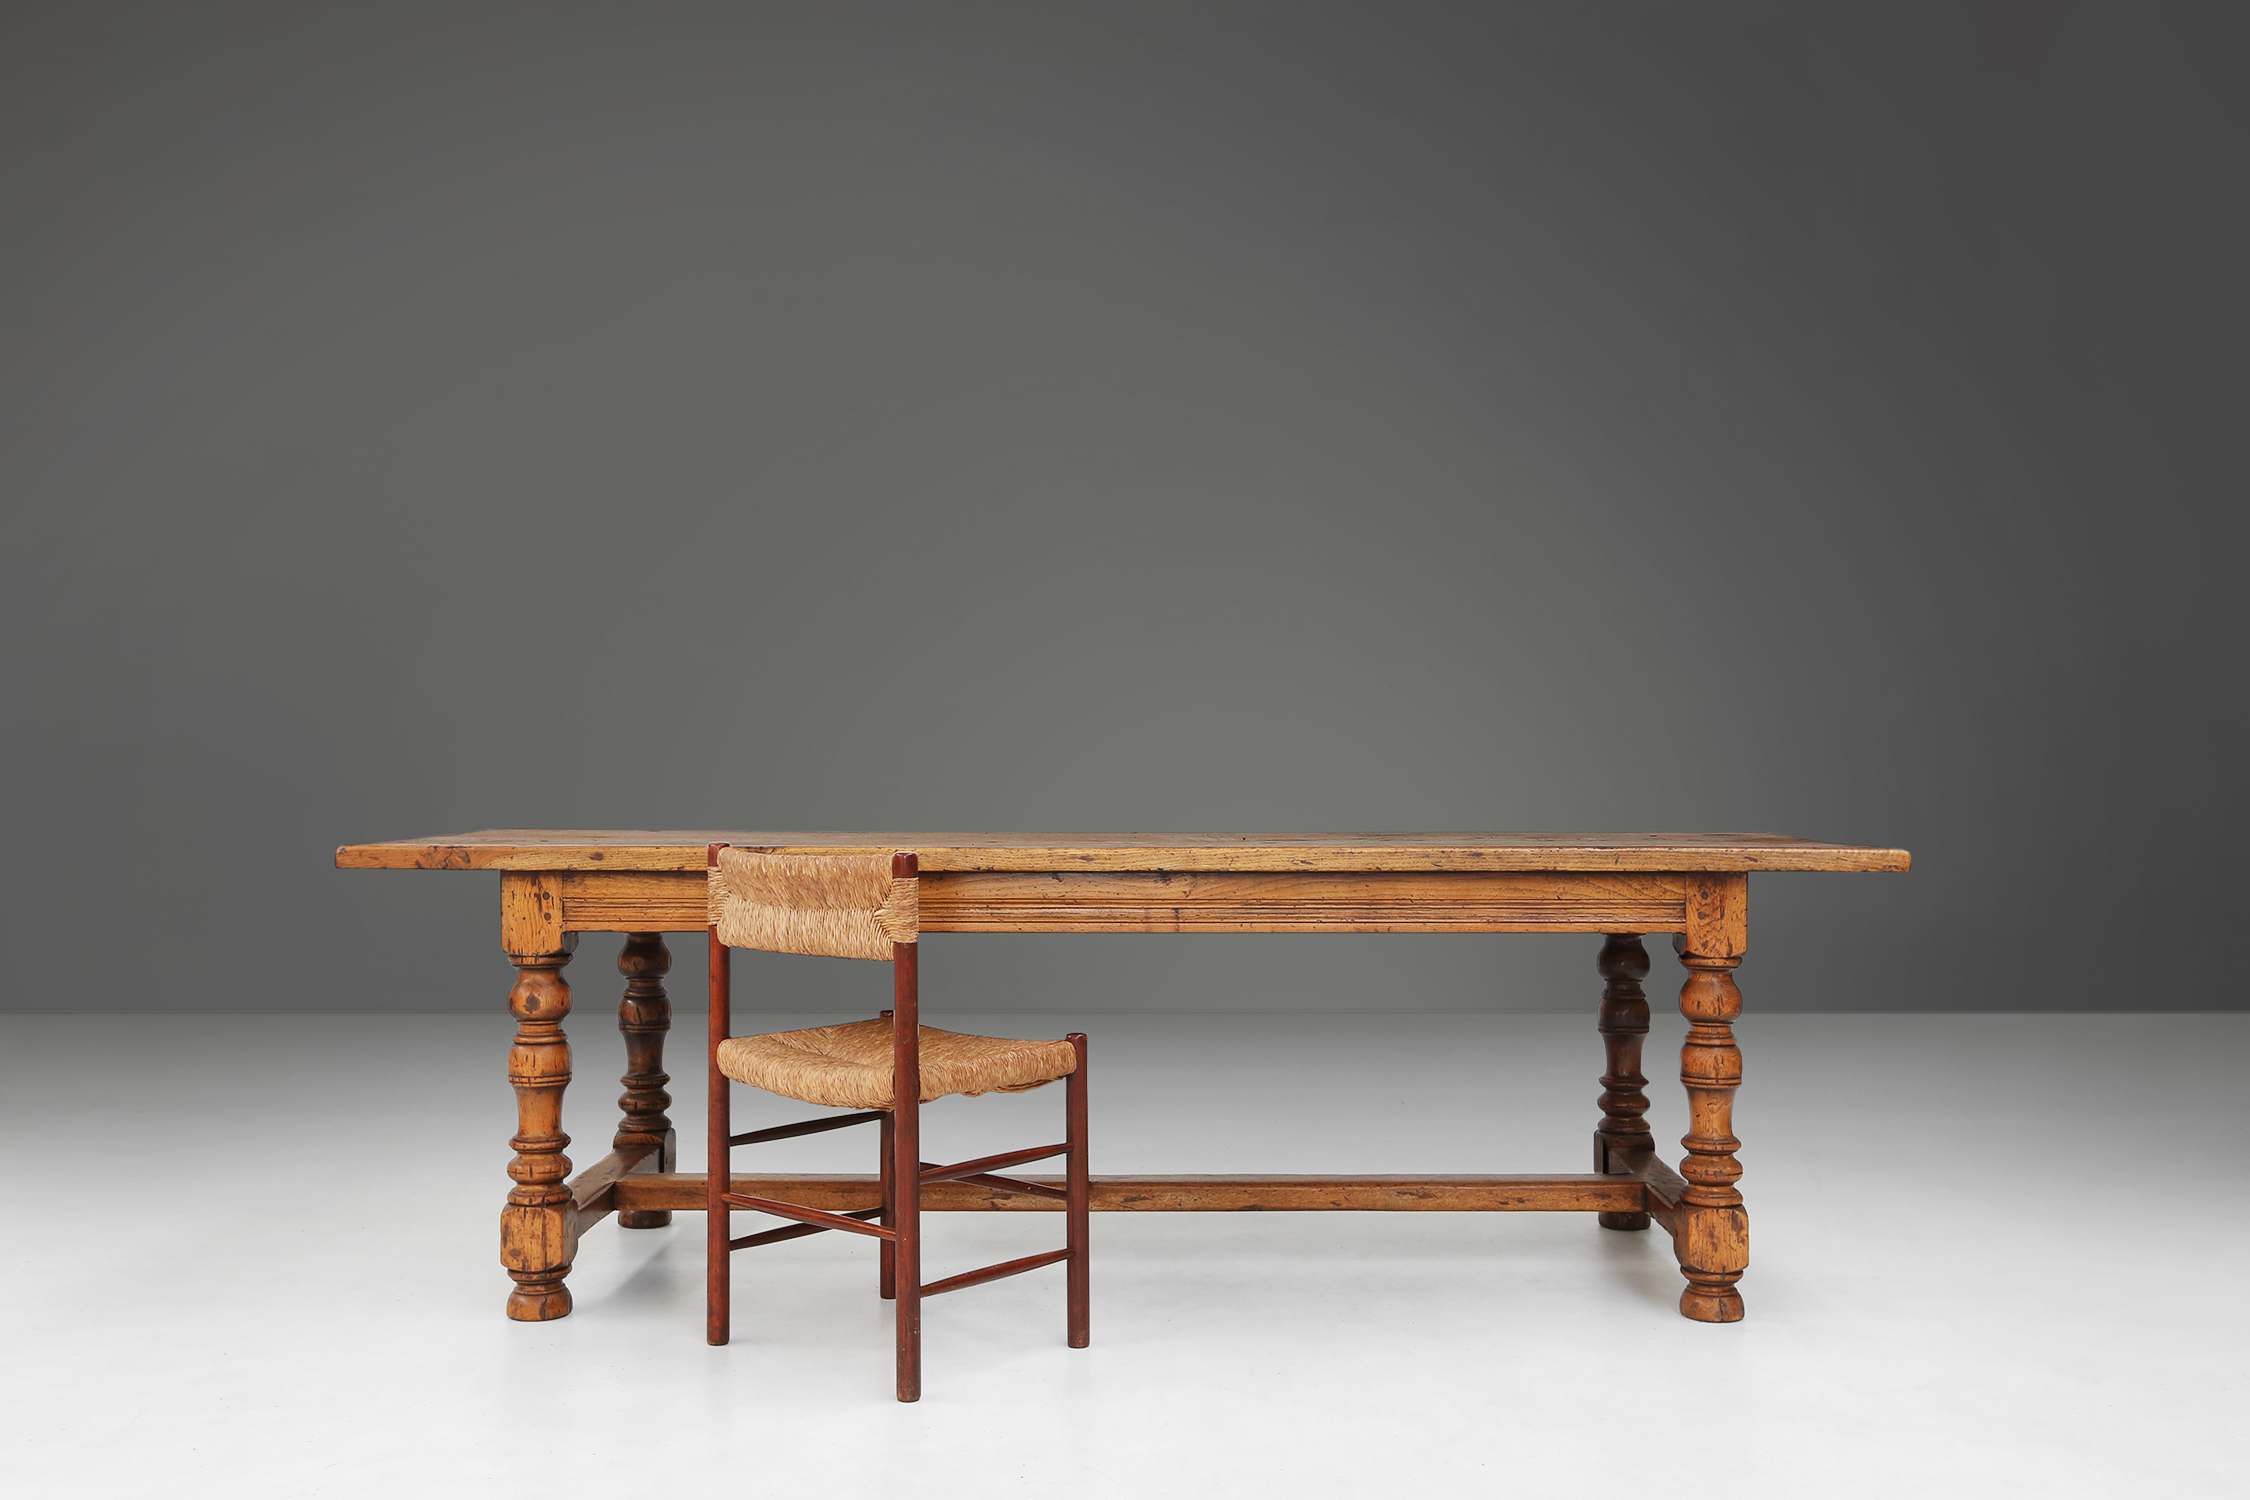 French 18th century oak dining table